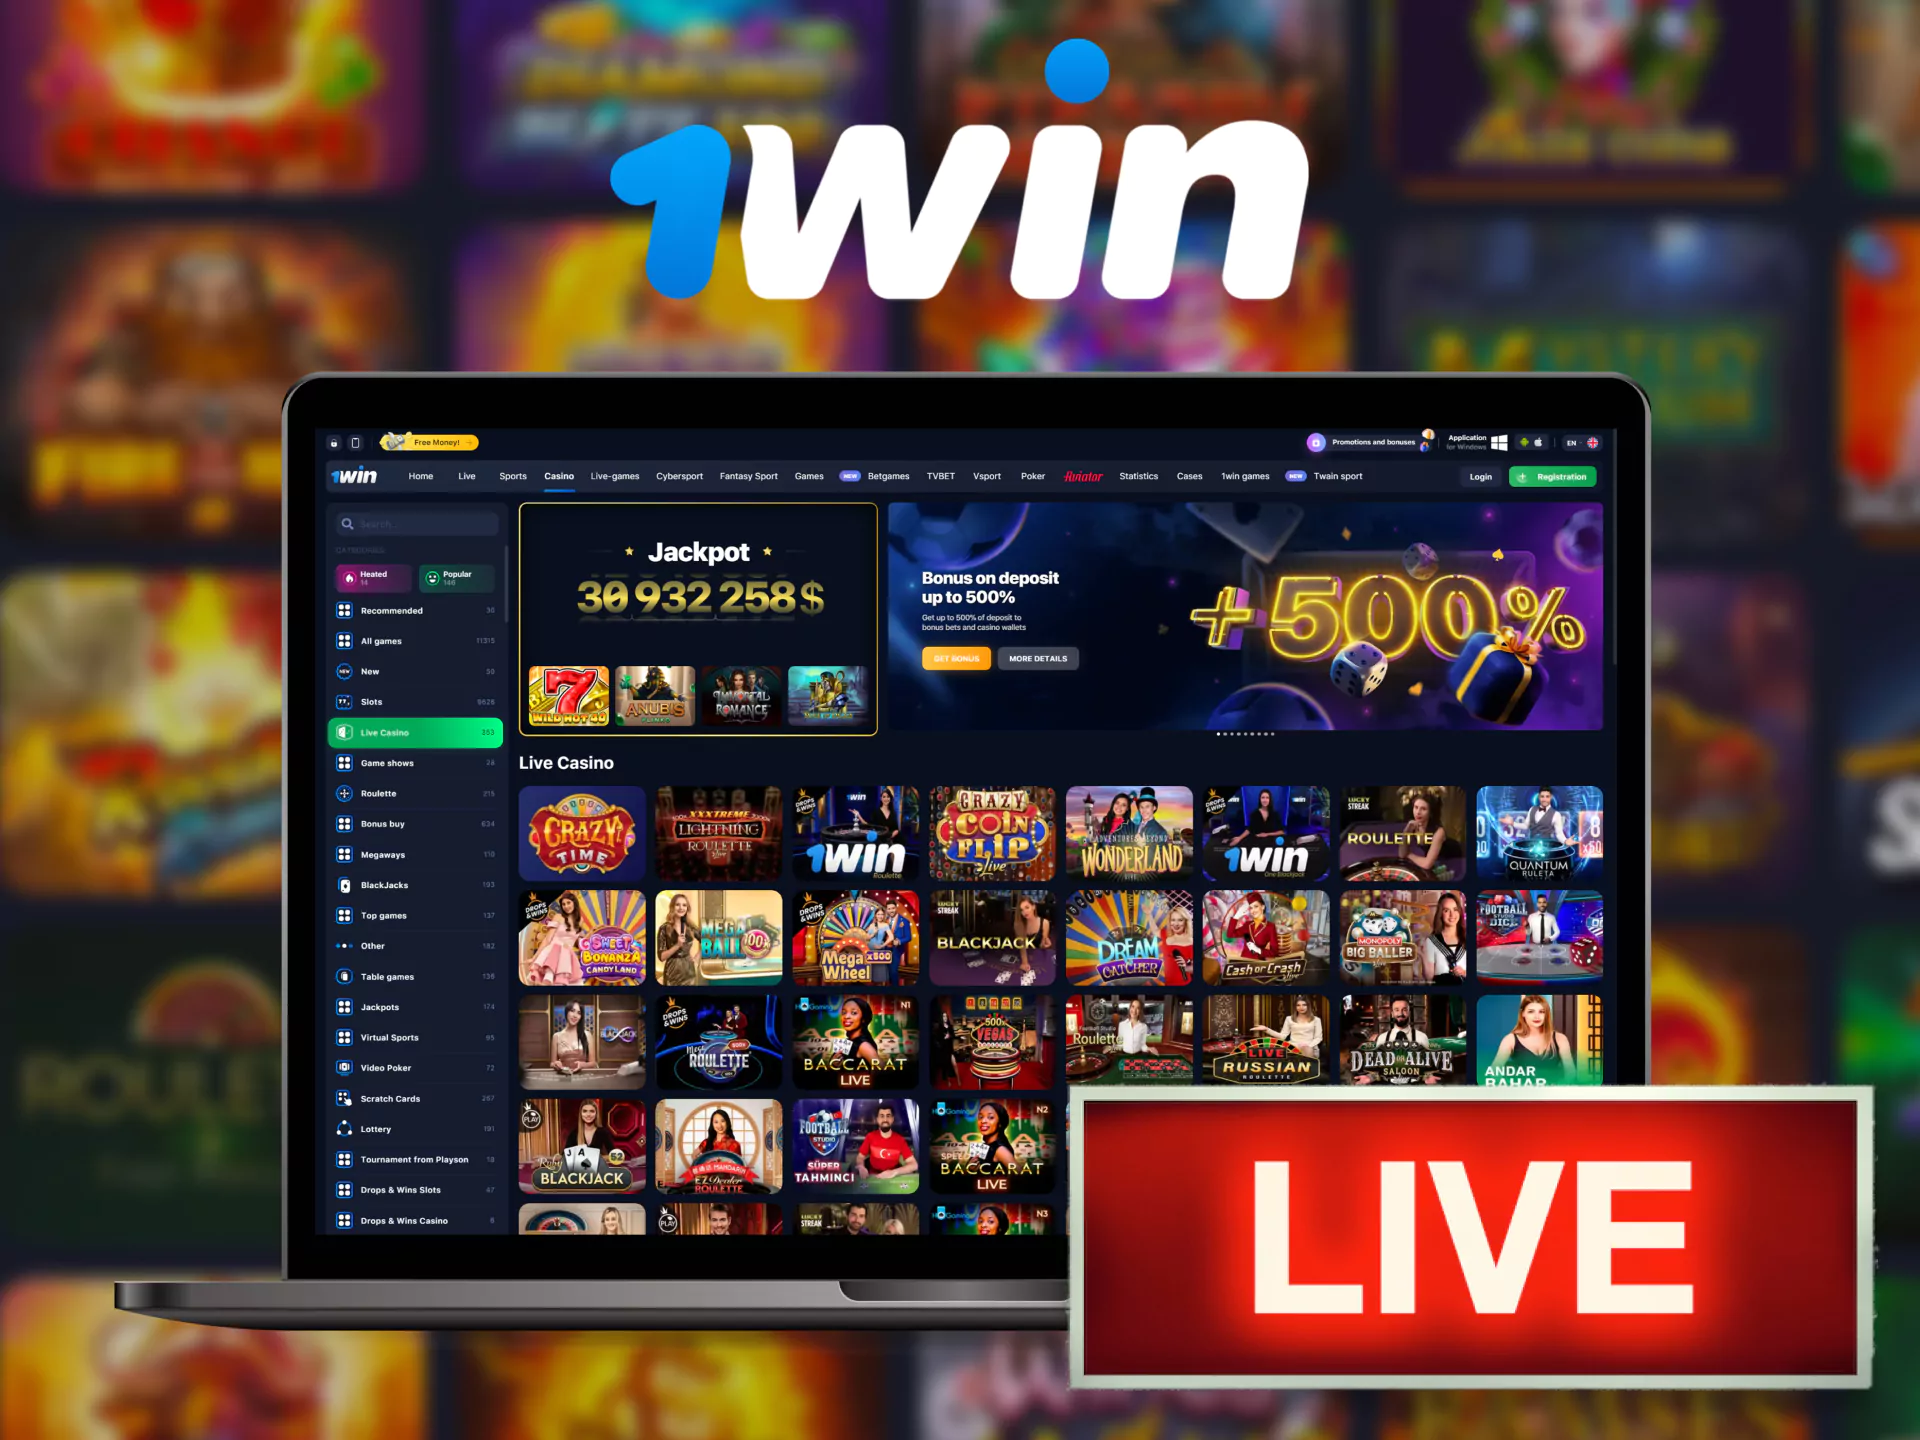 Play Live Casino on 1Win, place bets and win.